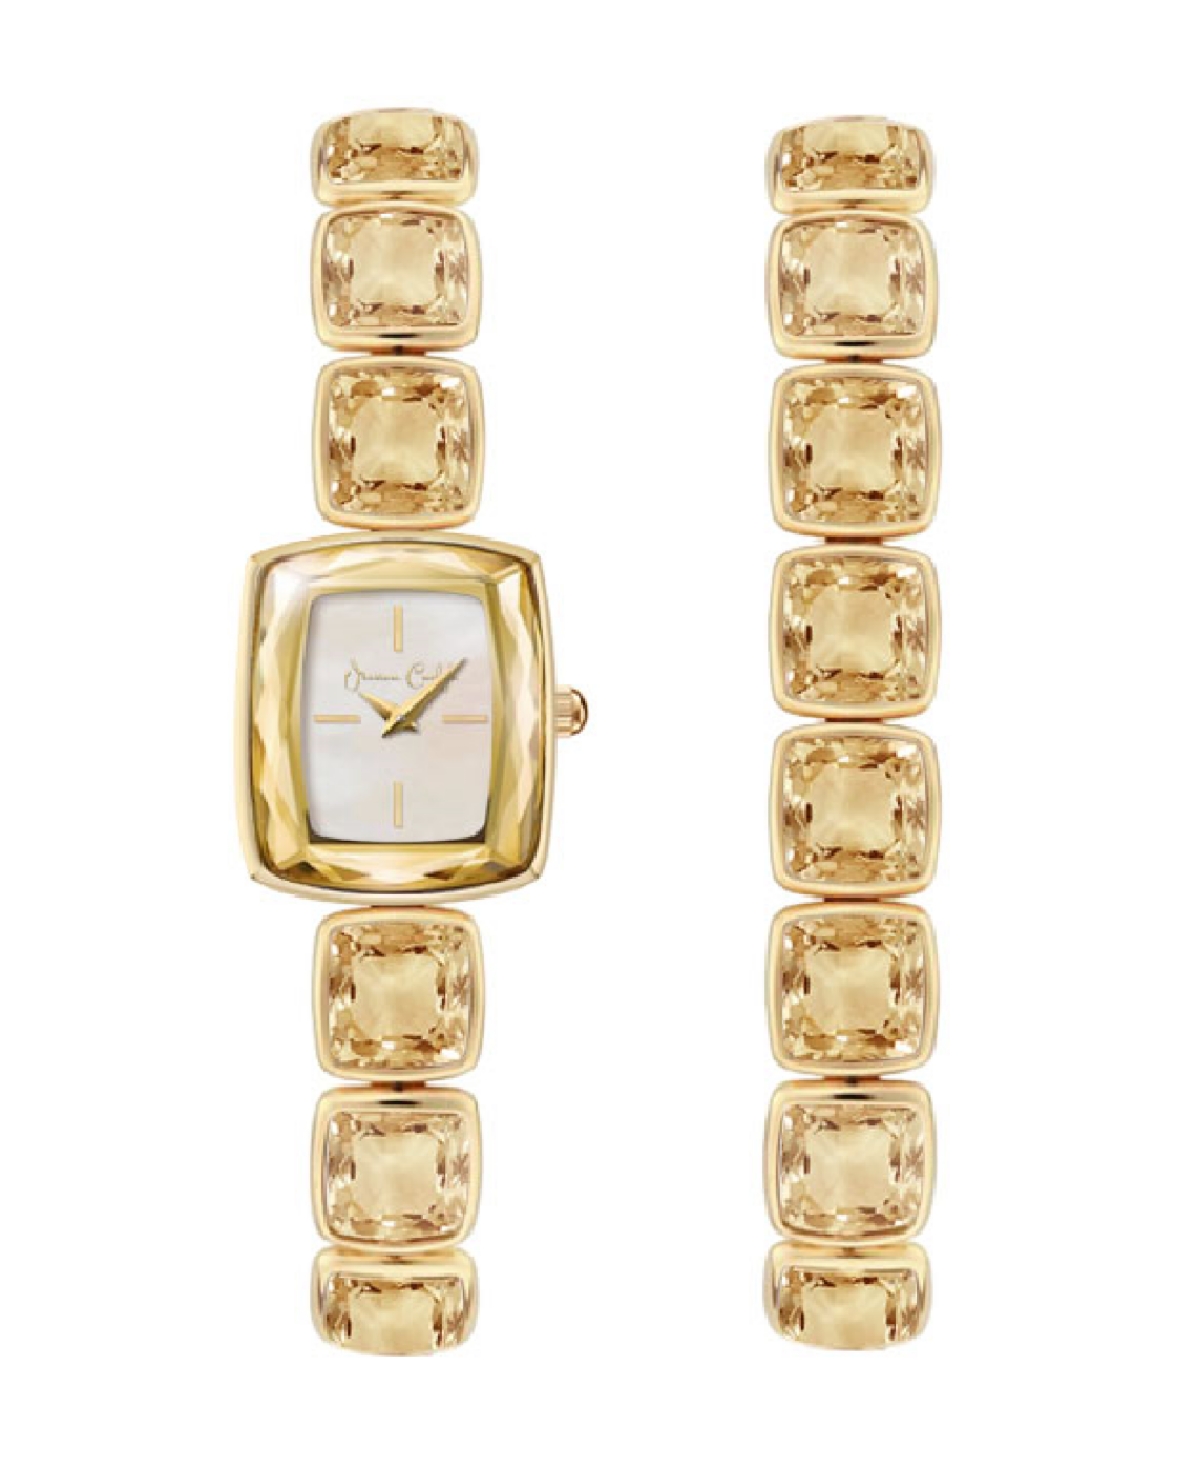 Women's Quartz Gold-Tone Alloy Watch 18mm Gift Set - Shiny Gold, White Mother of Pearl